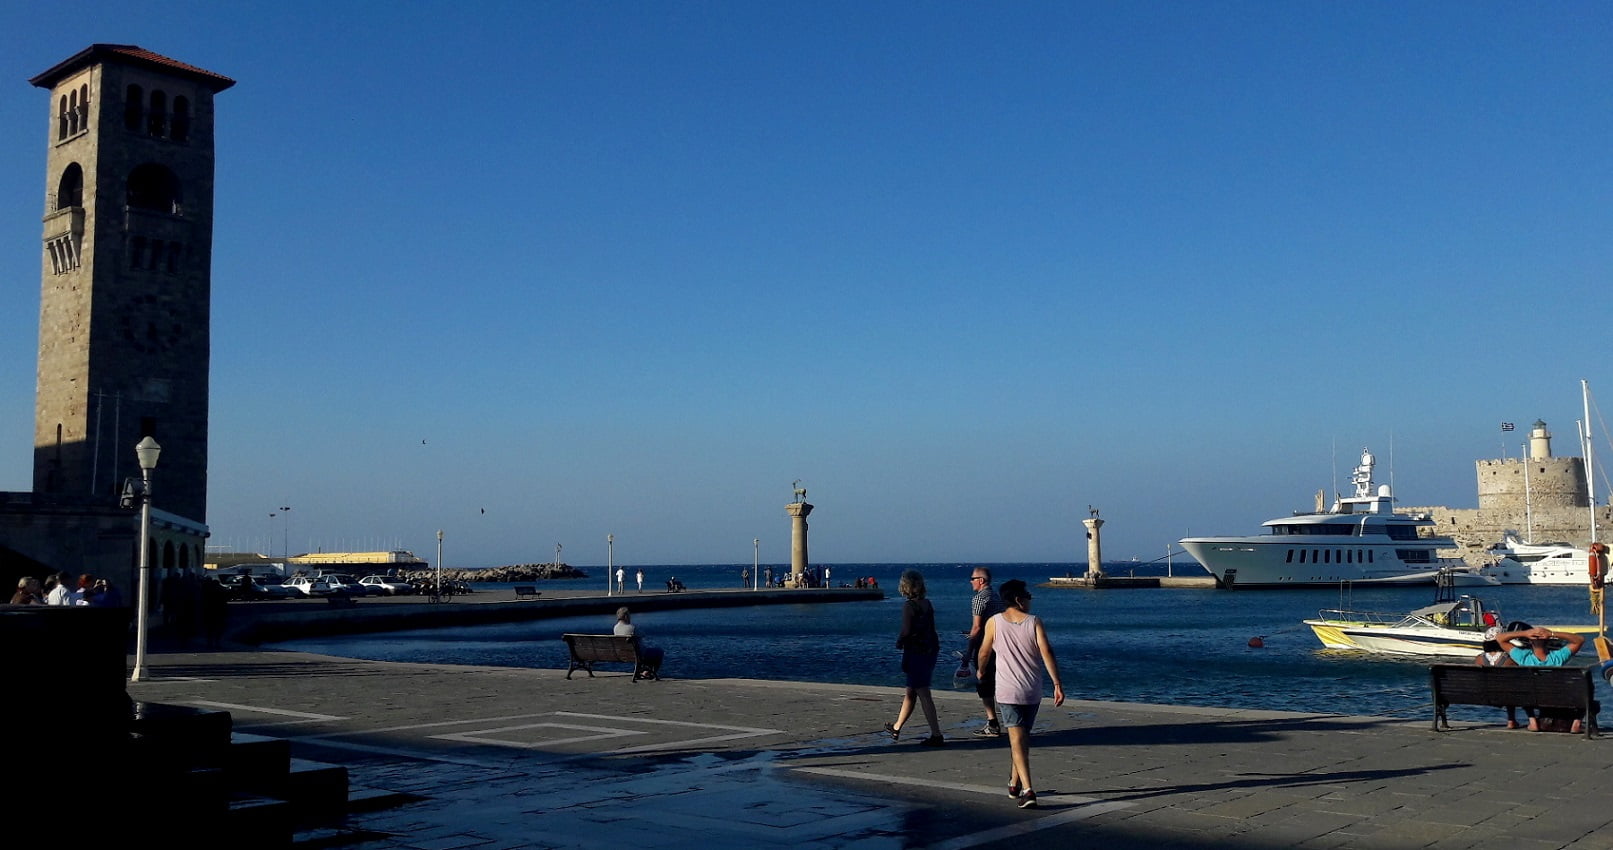 rhodes-greece-colossus-harbor-glimpses-of-the-world